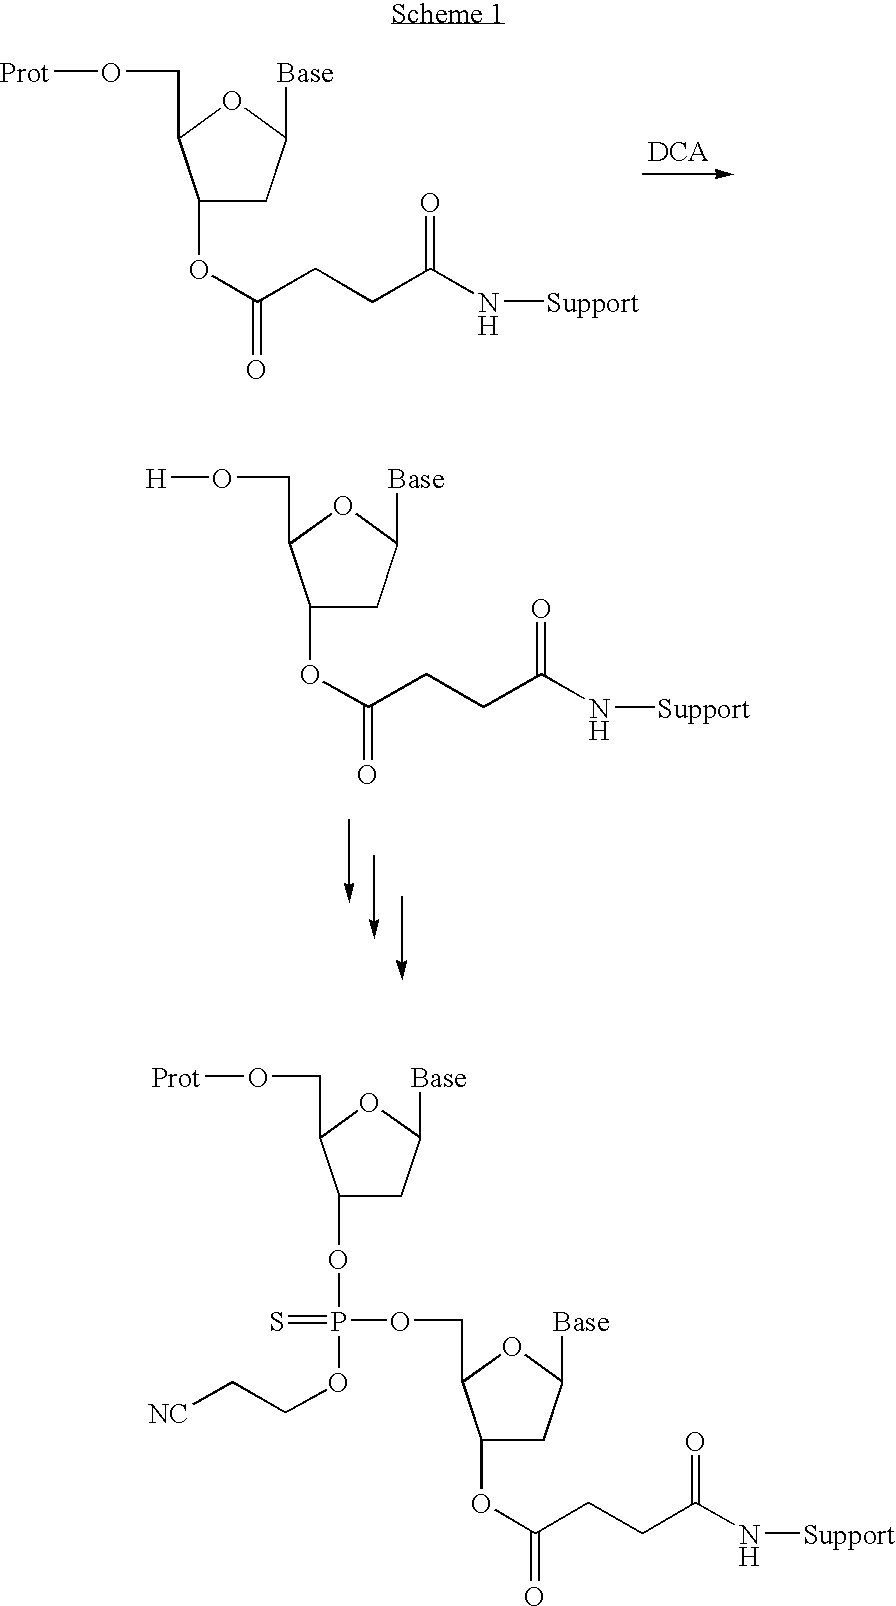 Methods for detection of chloral hydrate in dichloroacetic acid